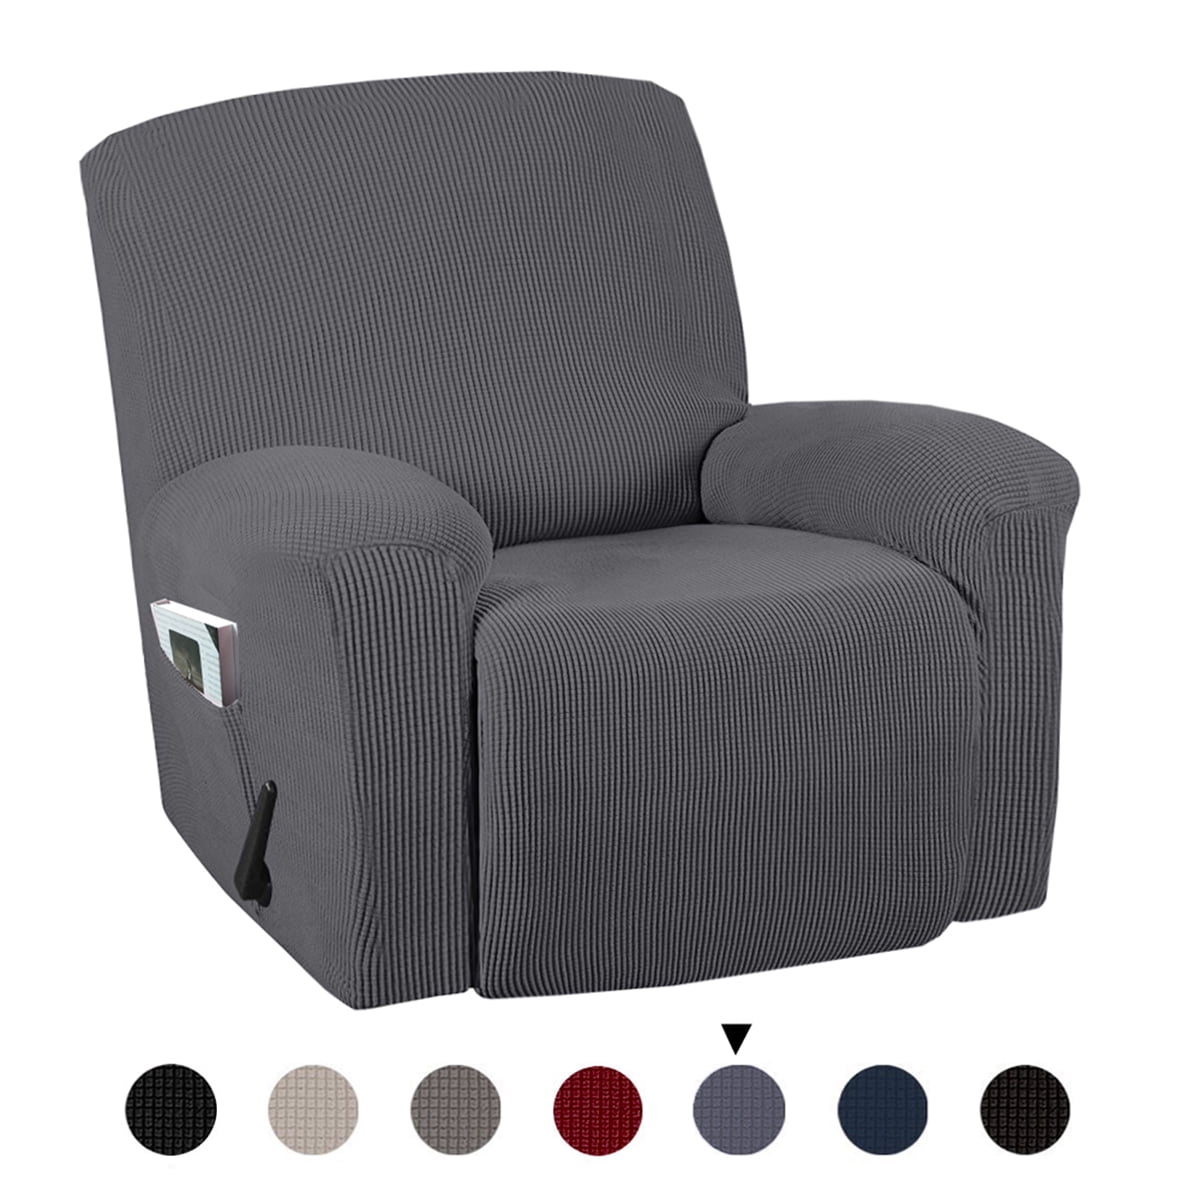 Stretch Recliner Slipcover Chair Covers Elastic Sofa Couch Furniture Protector 